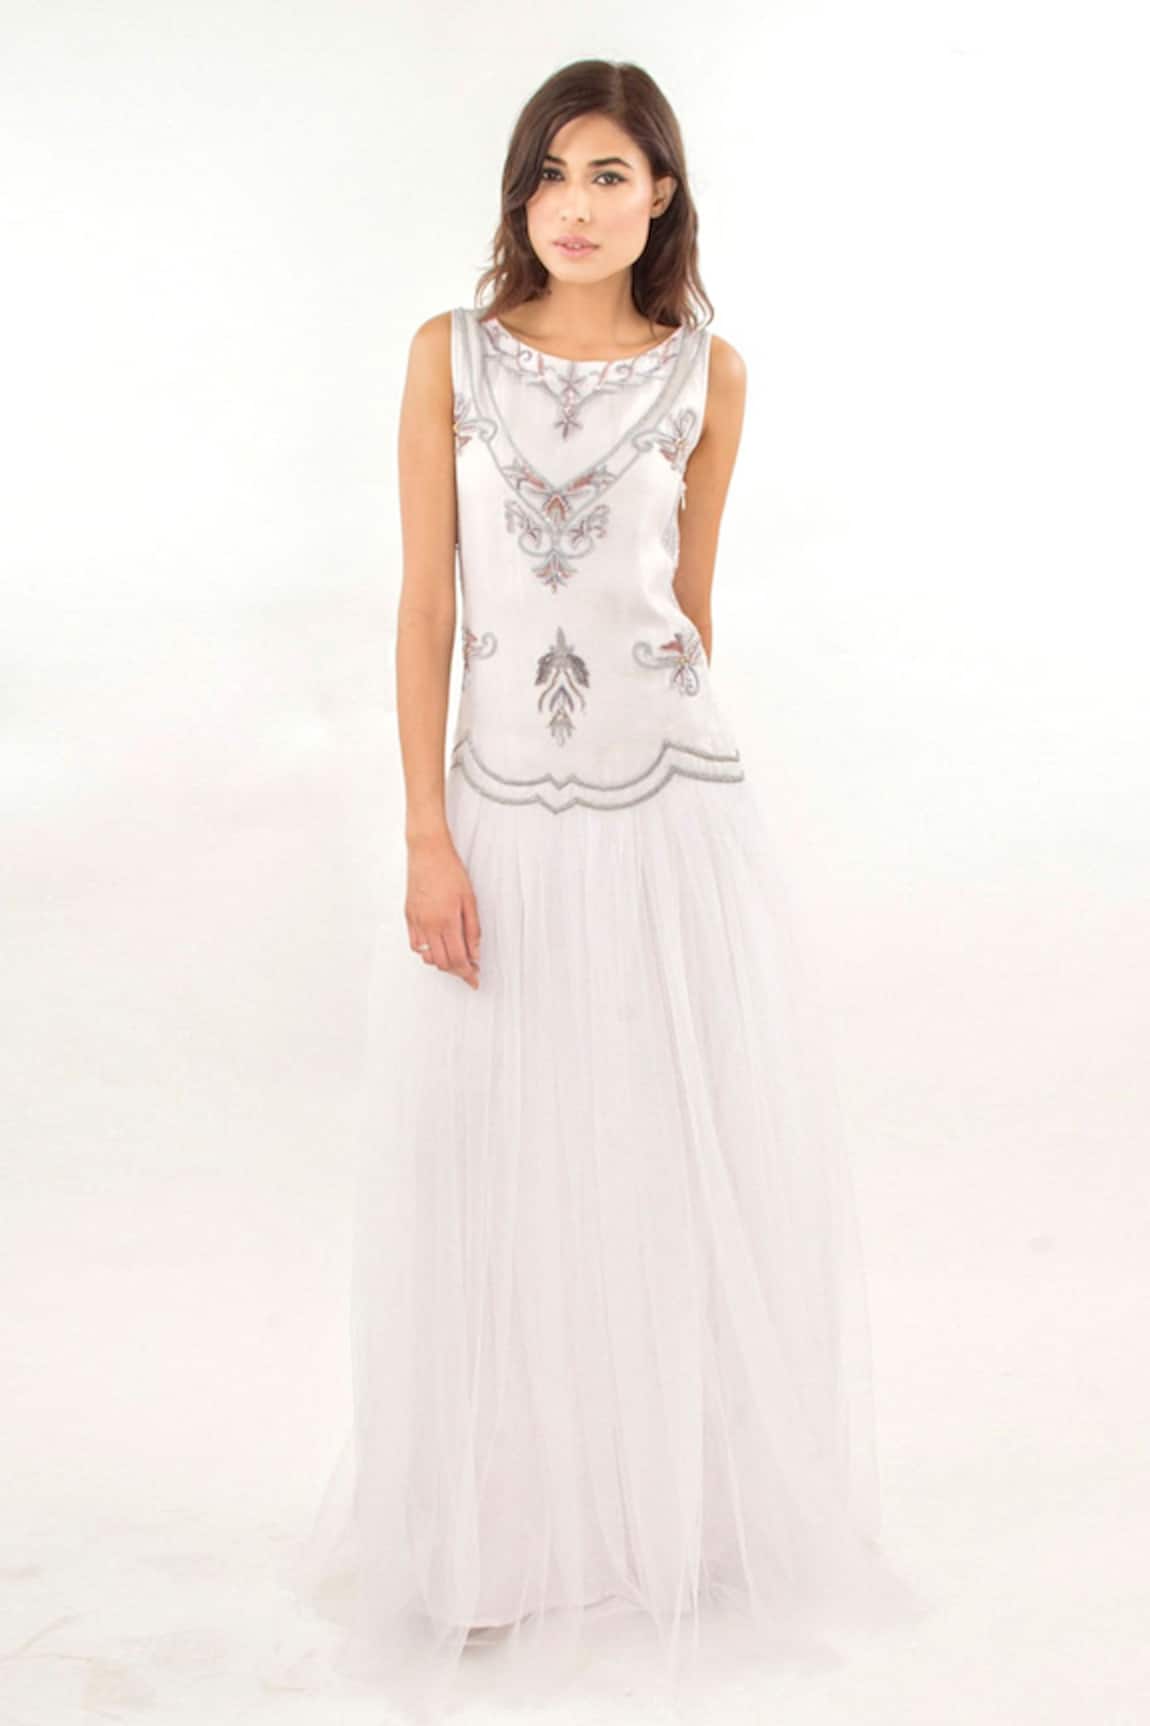 Jasmine Bains Floral Embroidered Gown